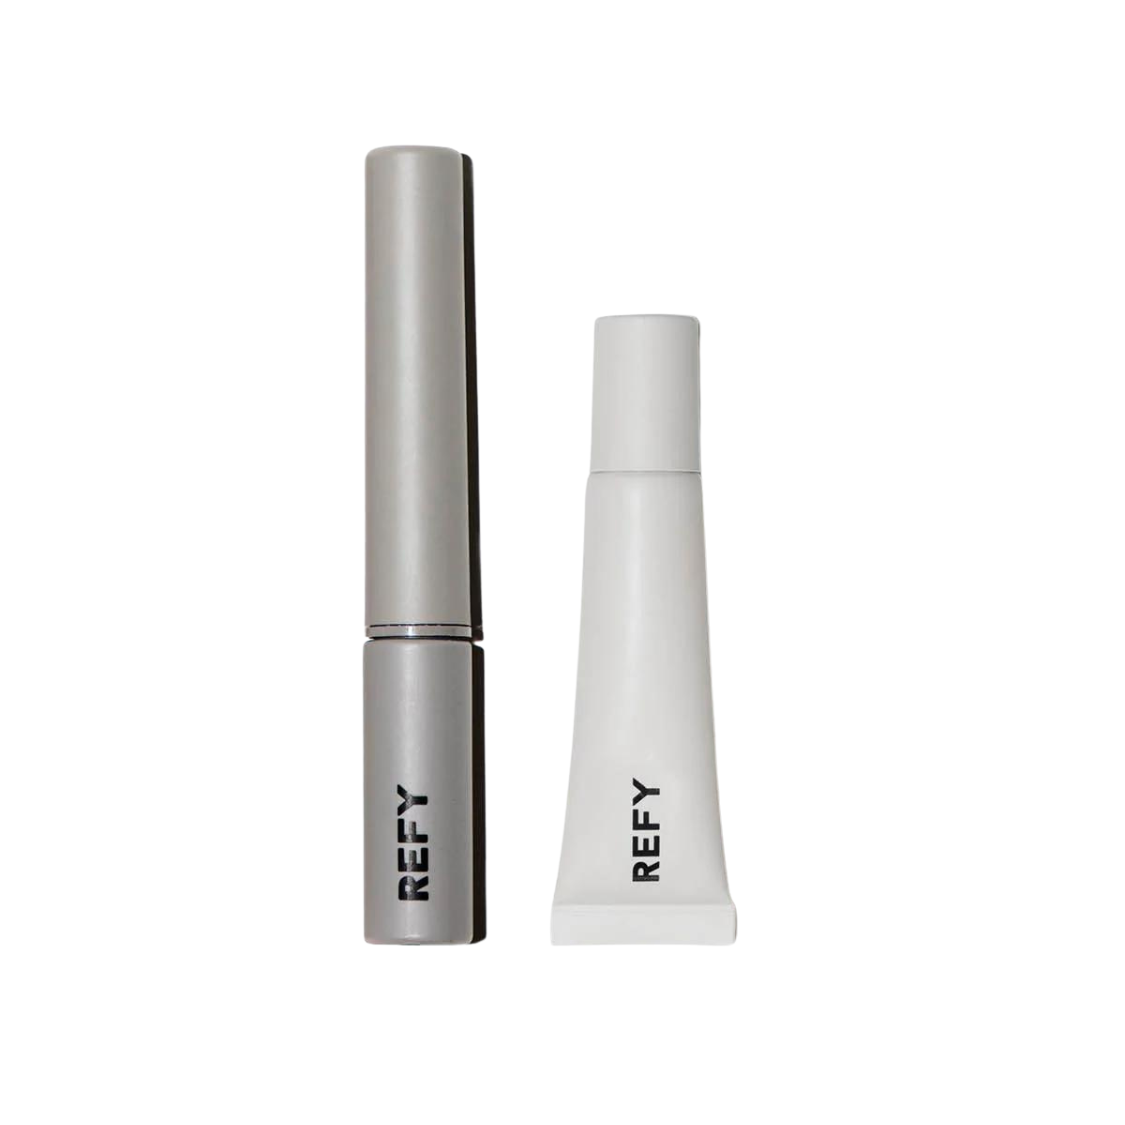 Two lip products on a white background. The products can be used to create a soft goth look.